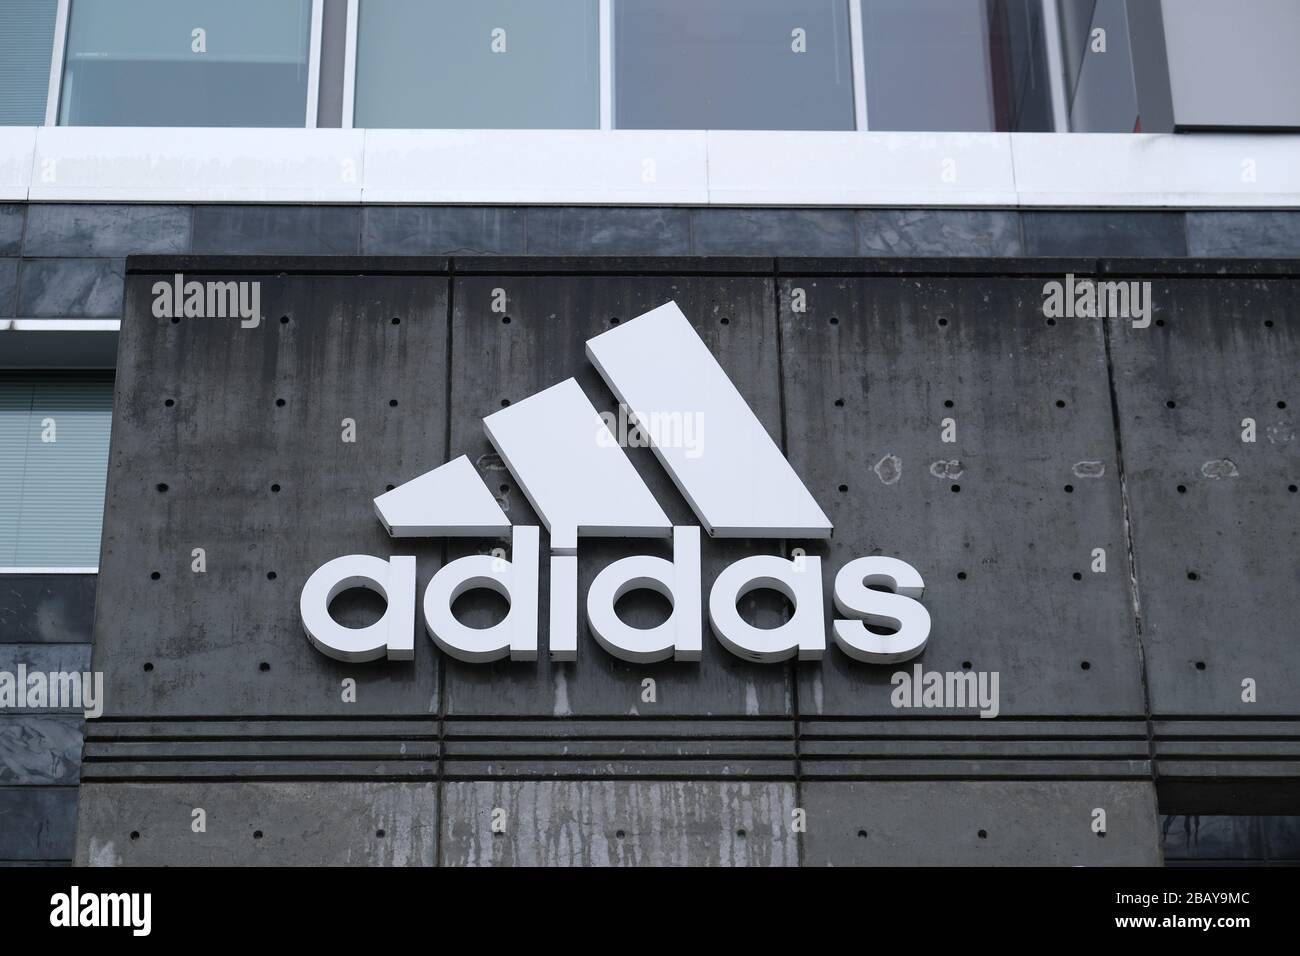 is adidas an american brand